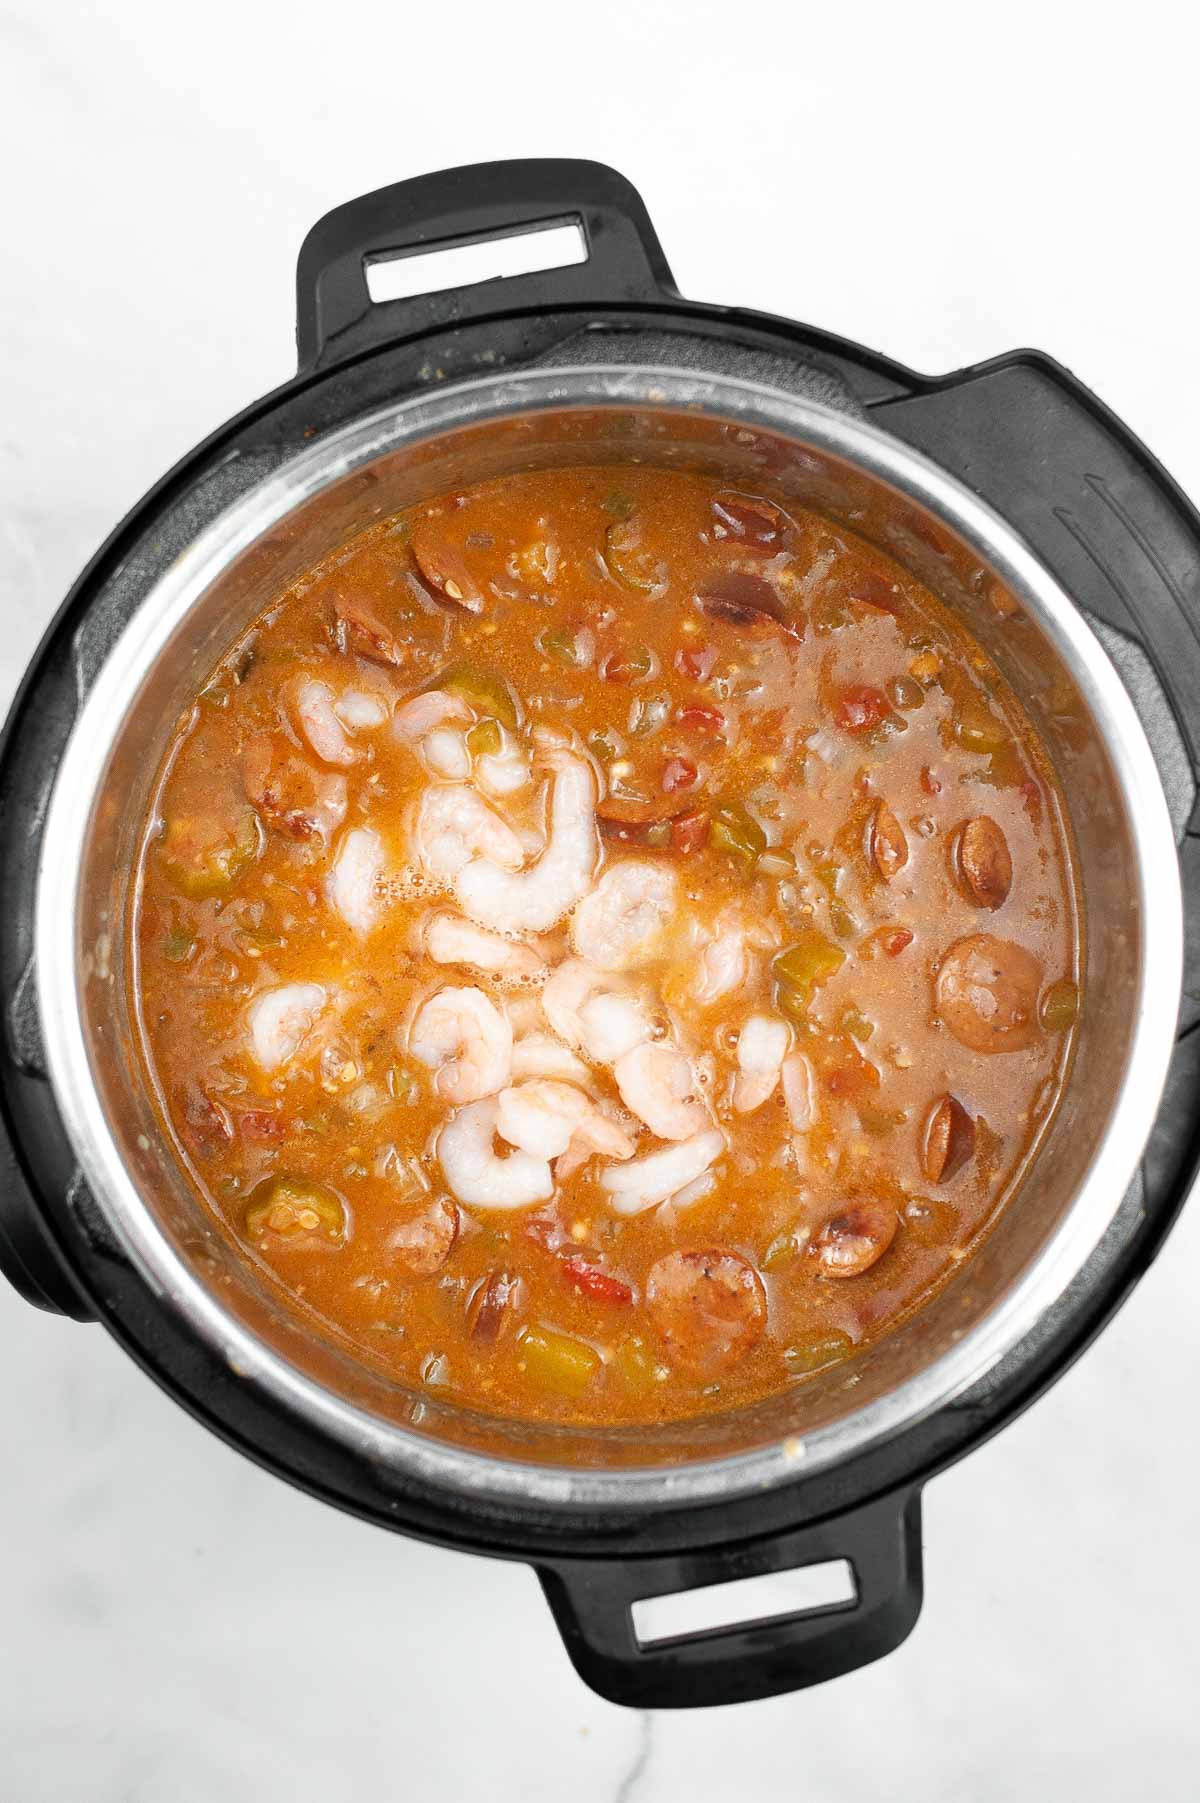 Adding shrimp to gumbo in the Instant Pot